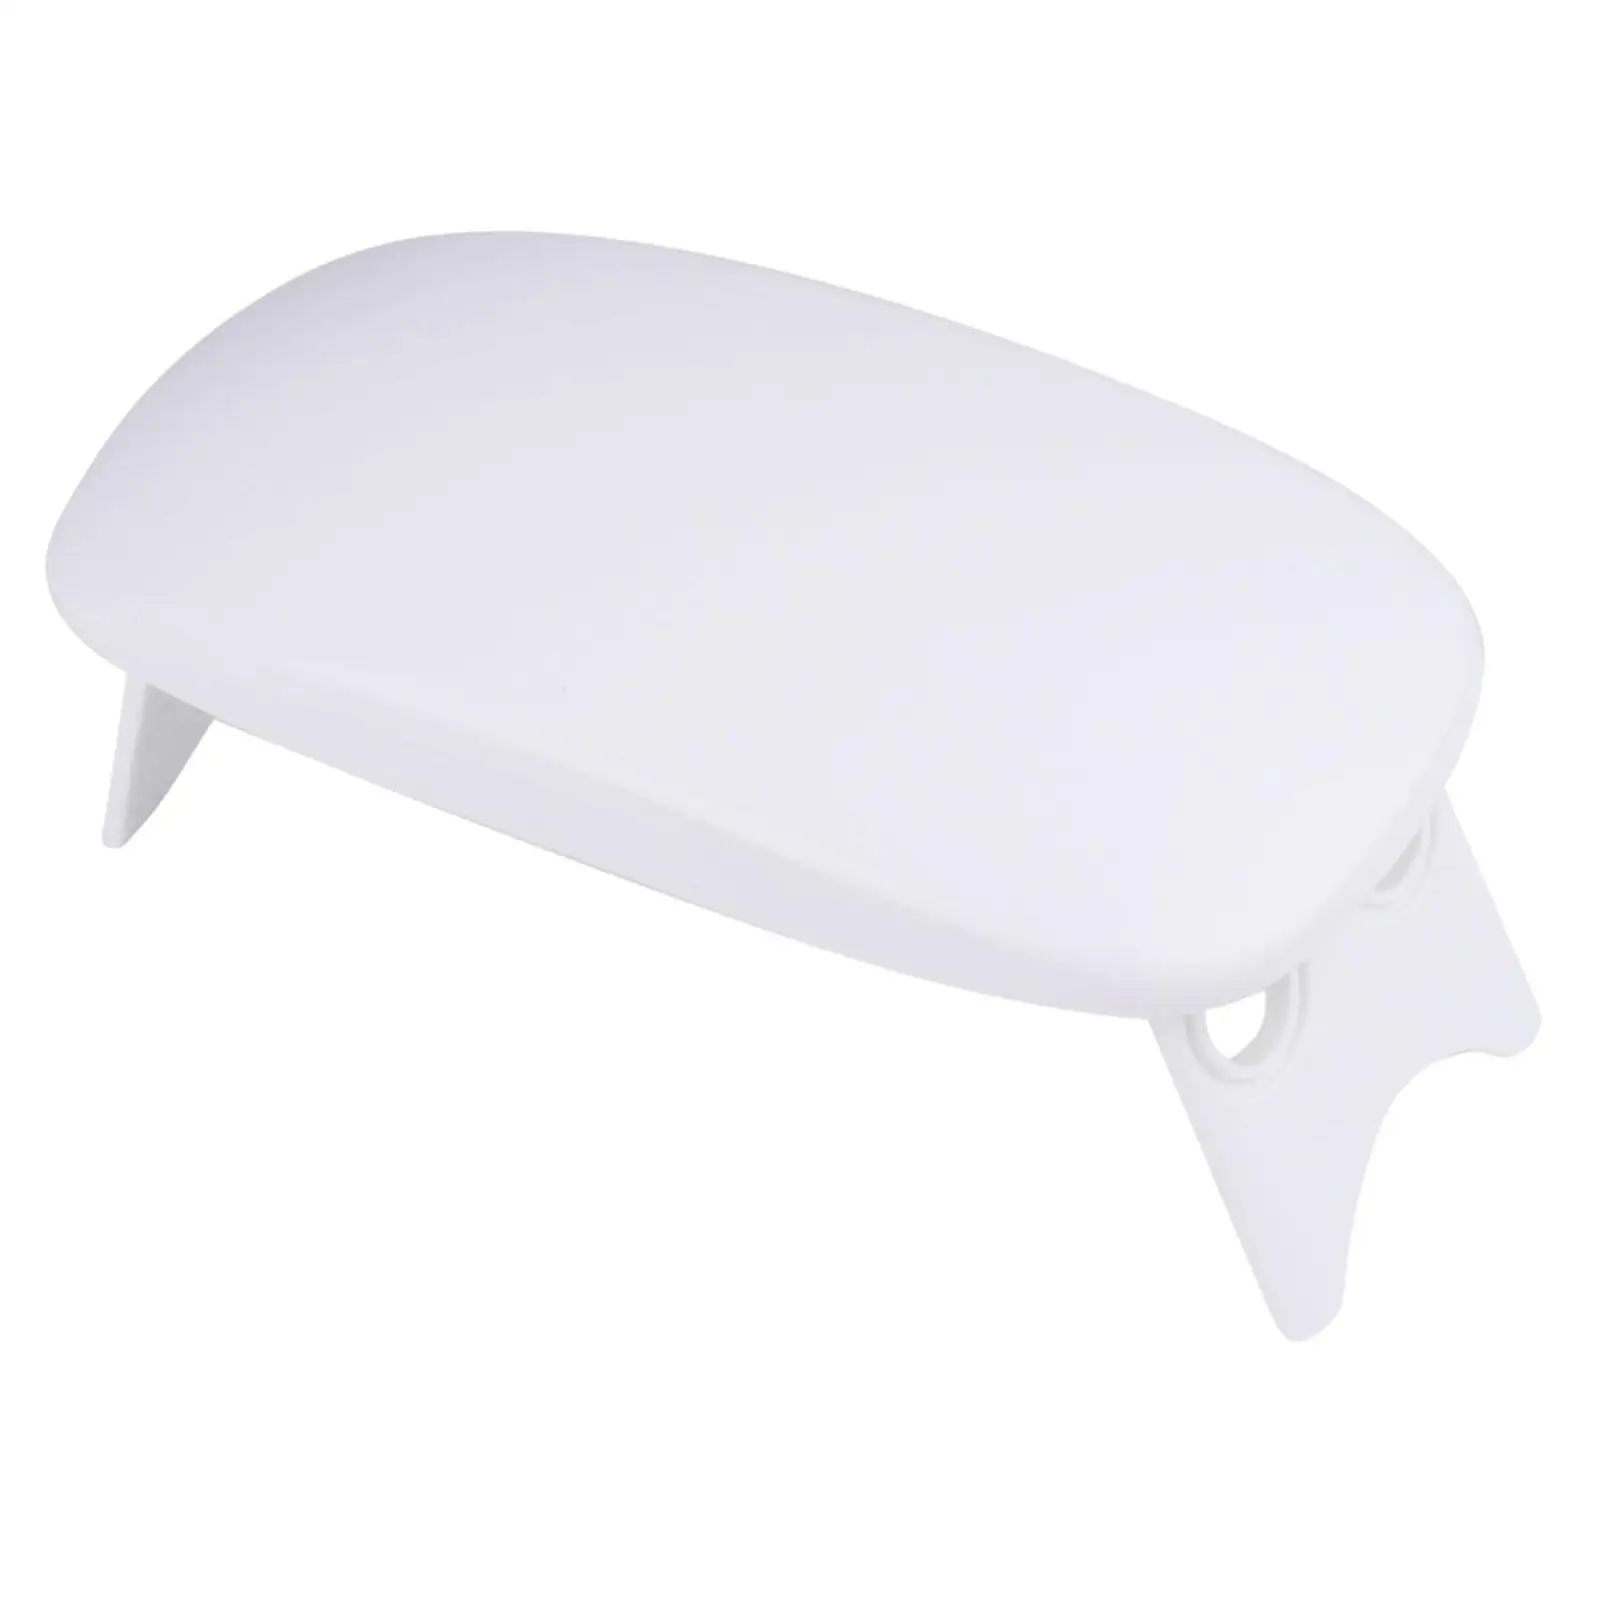 Nail Arm Rest Stand Table Desk Station Non Slip Comfortable Home DIY Professional Foldable Manicure Pillow Manicure Hand Cushion